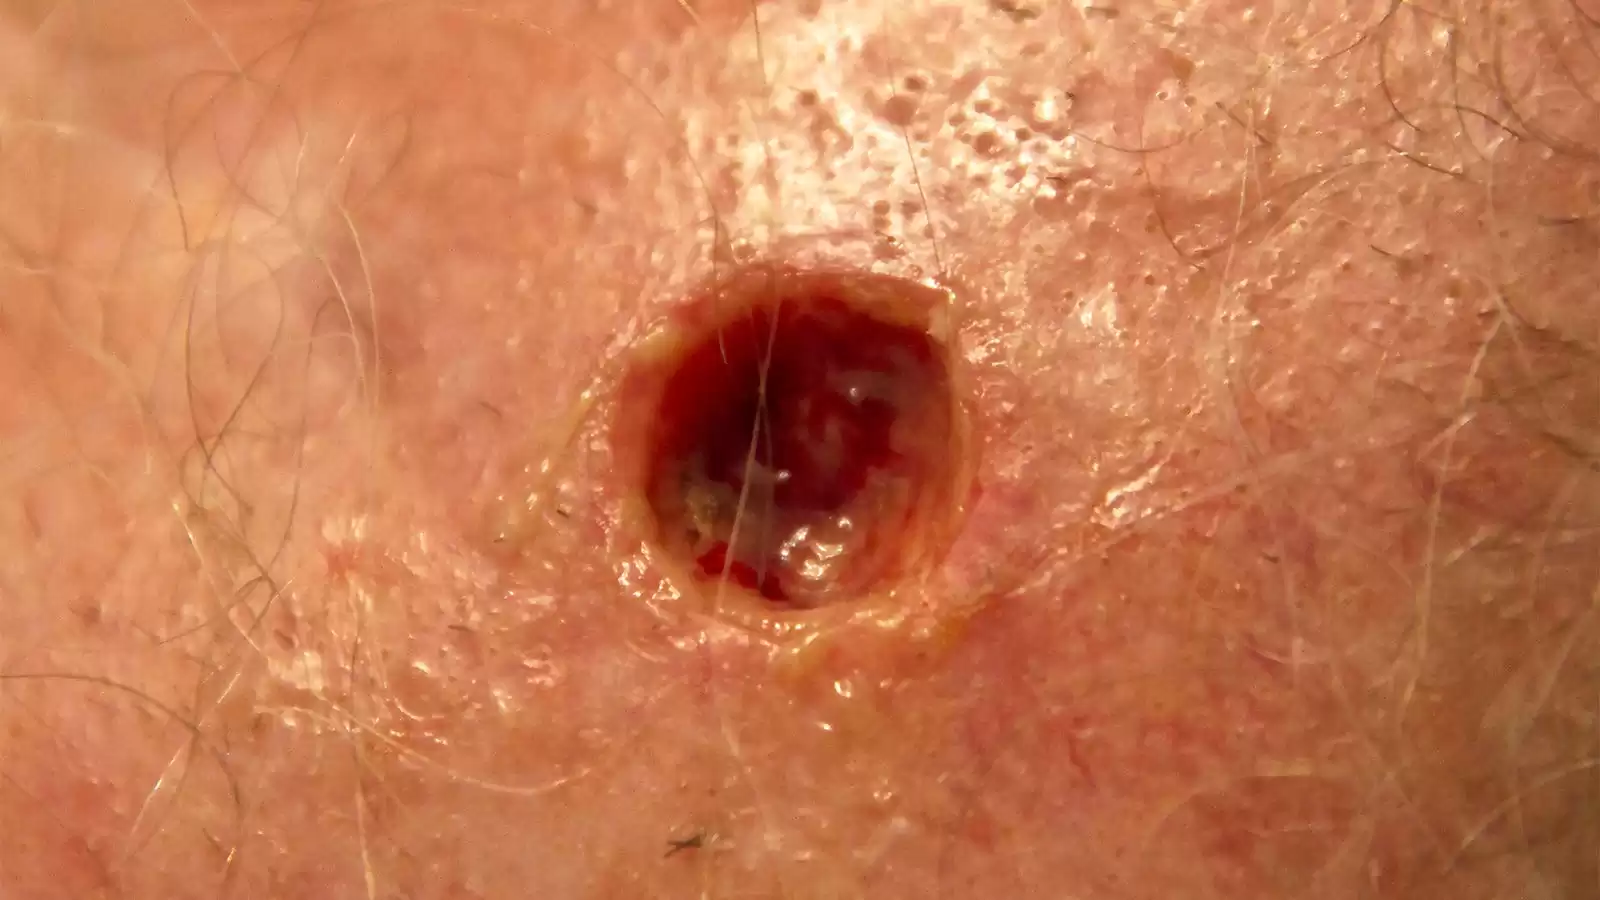 Mohs Surgery Early-Stage Merkel Cell Carcinoma: Is it the Best Approach?